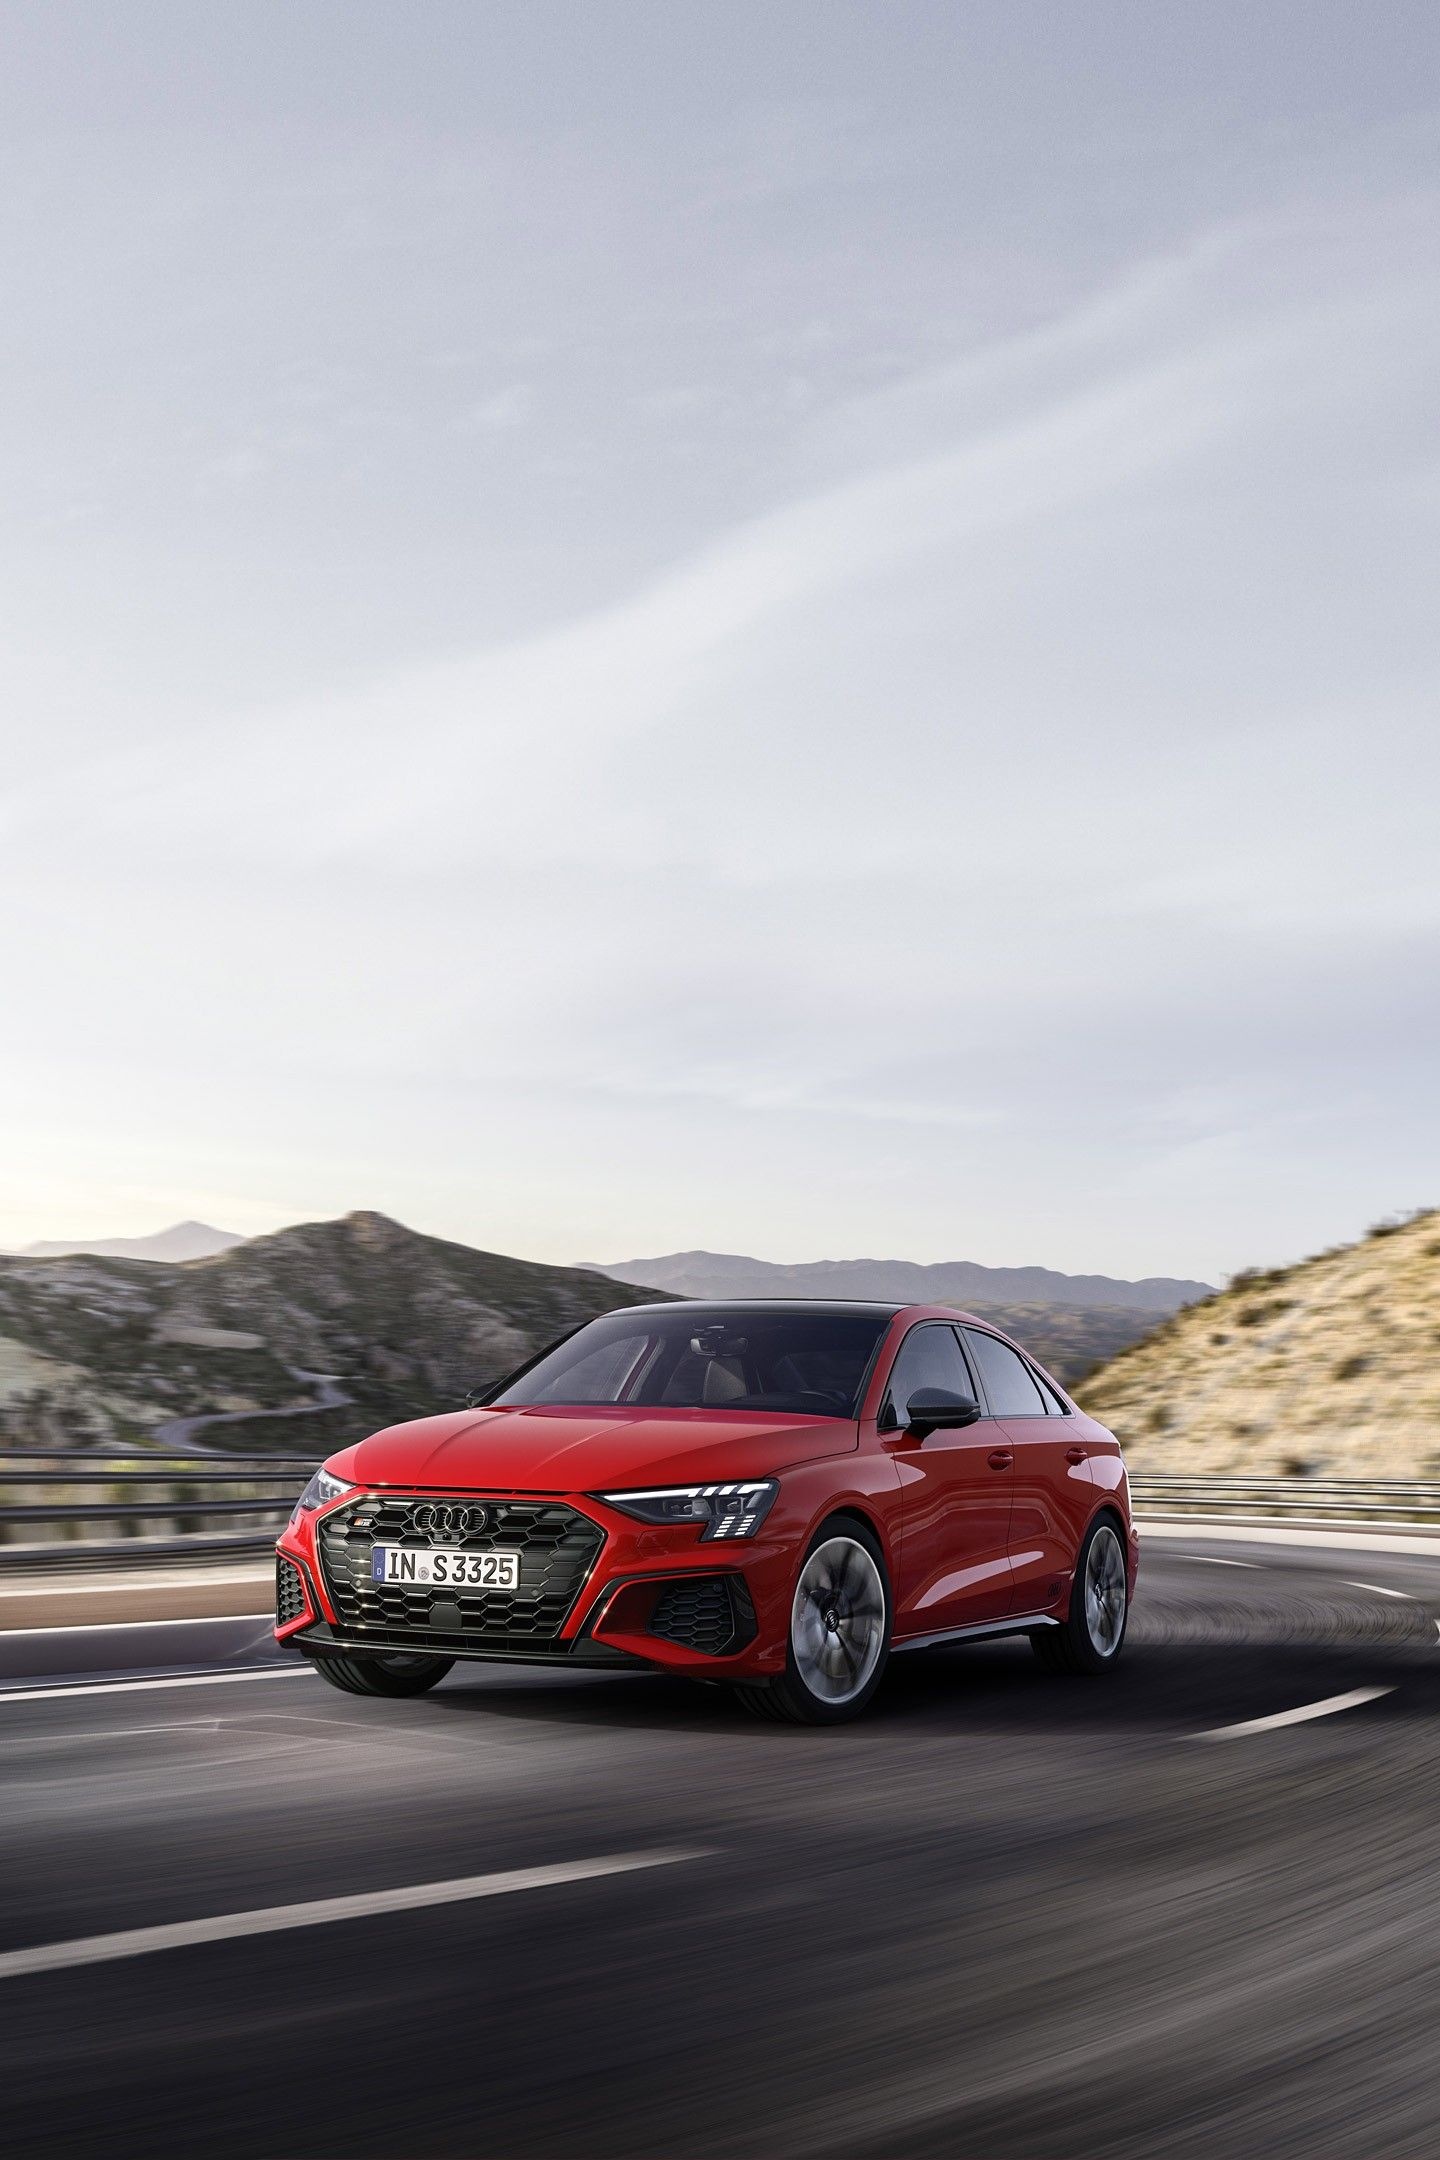 Audi S3, Auto performance, 2022 model, Android wallpaper, 1440x2160 HD Handy